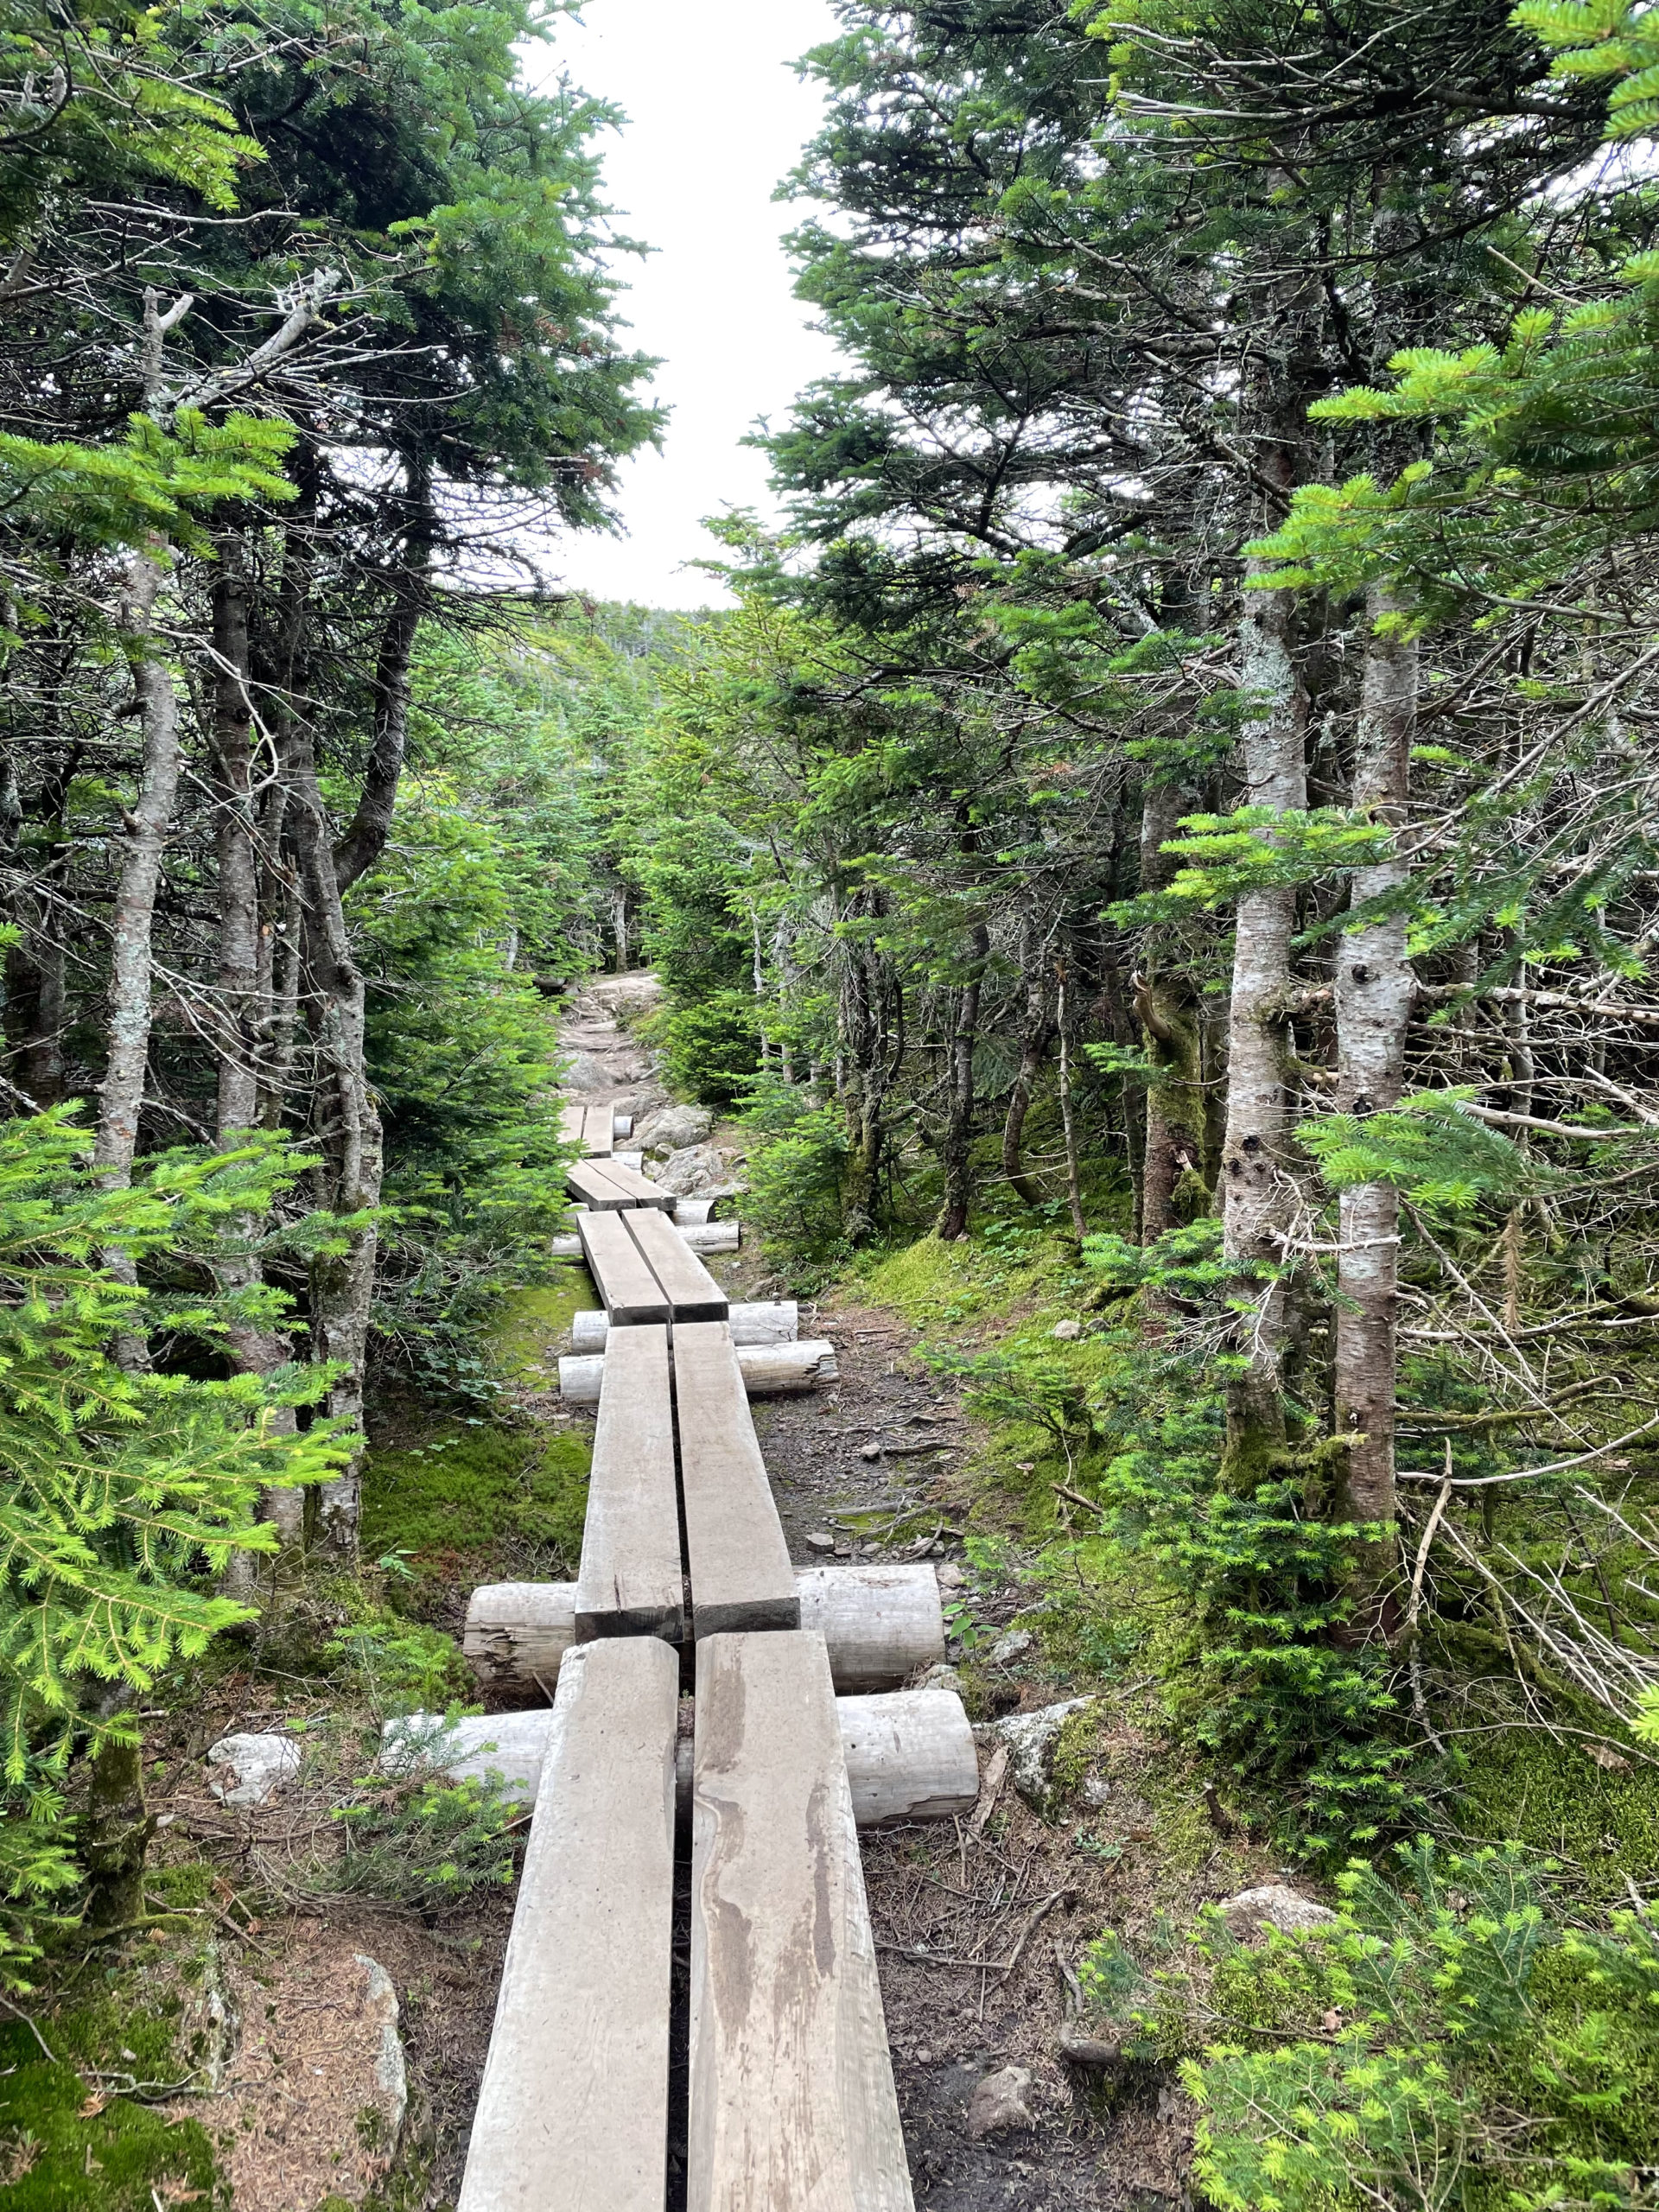 Bridges through the woods, seen while hiking Mt. Pierce and Mt. Jackson in the White Mountains National Forest, New Hampshire